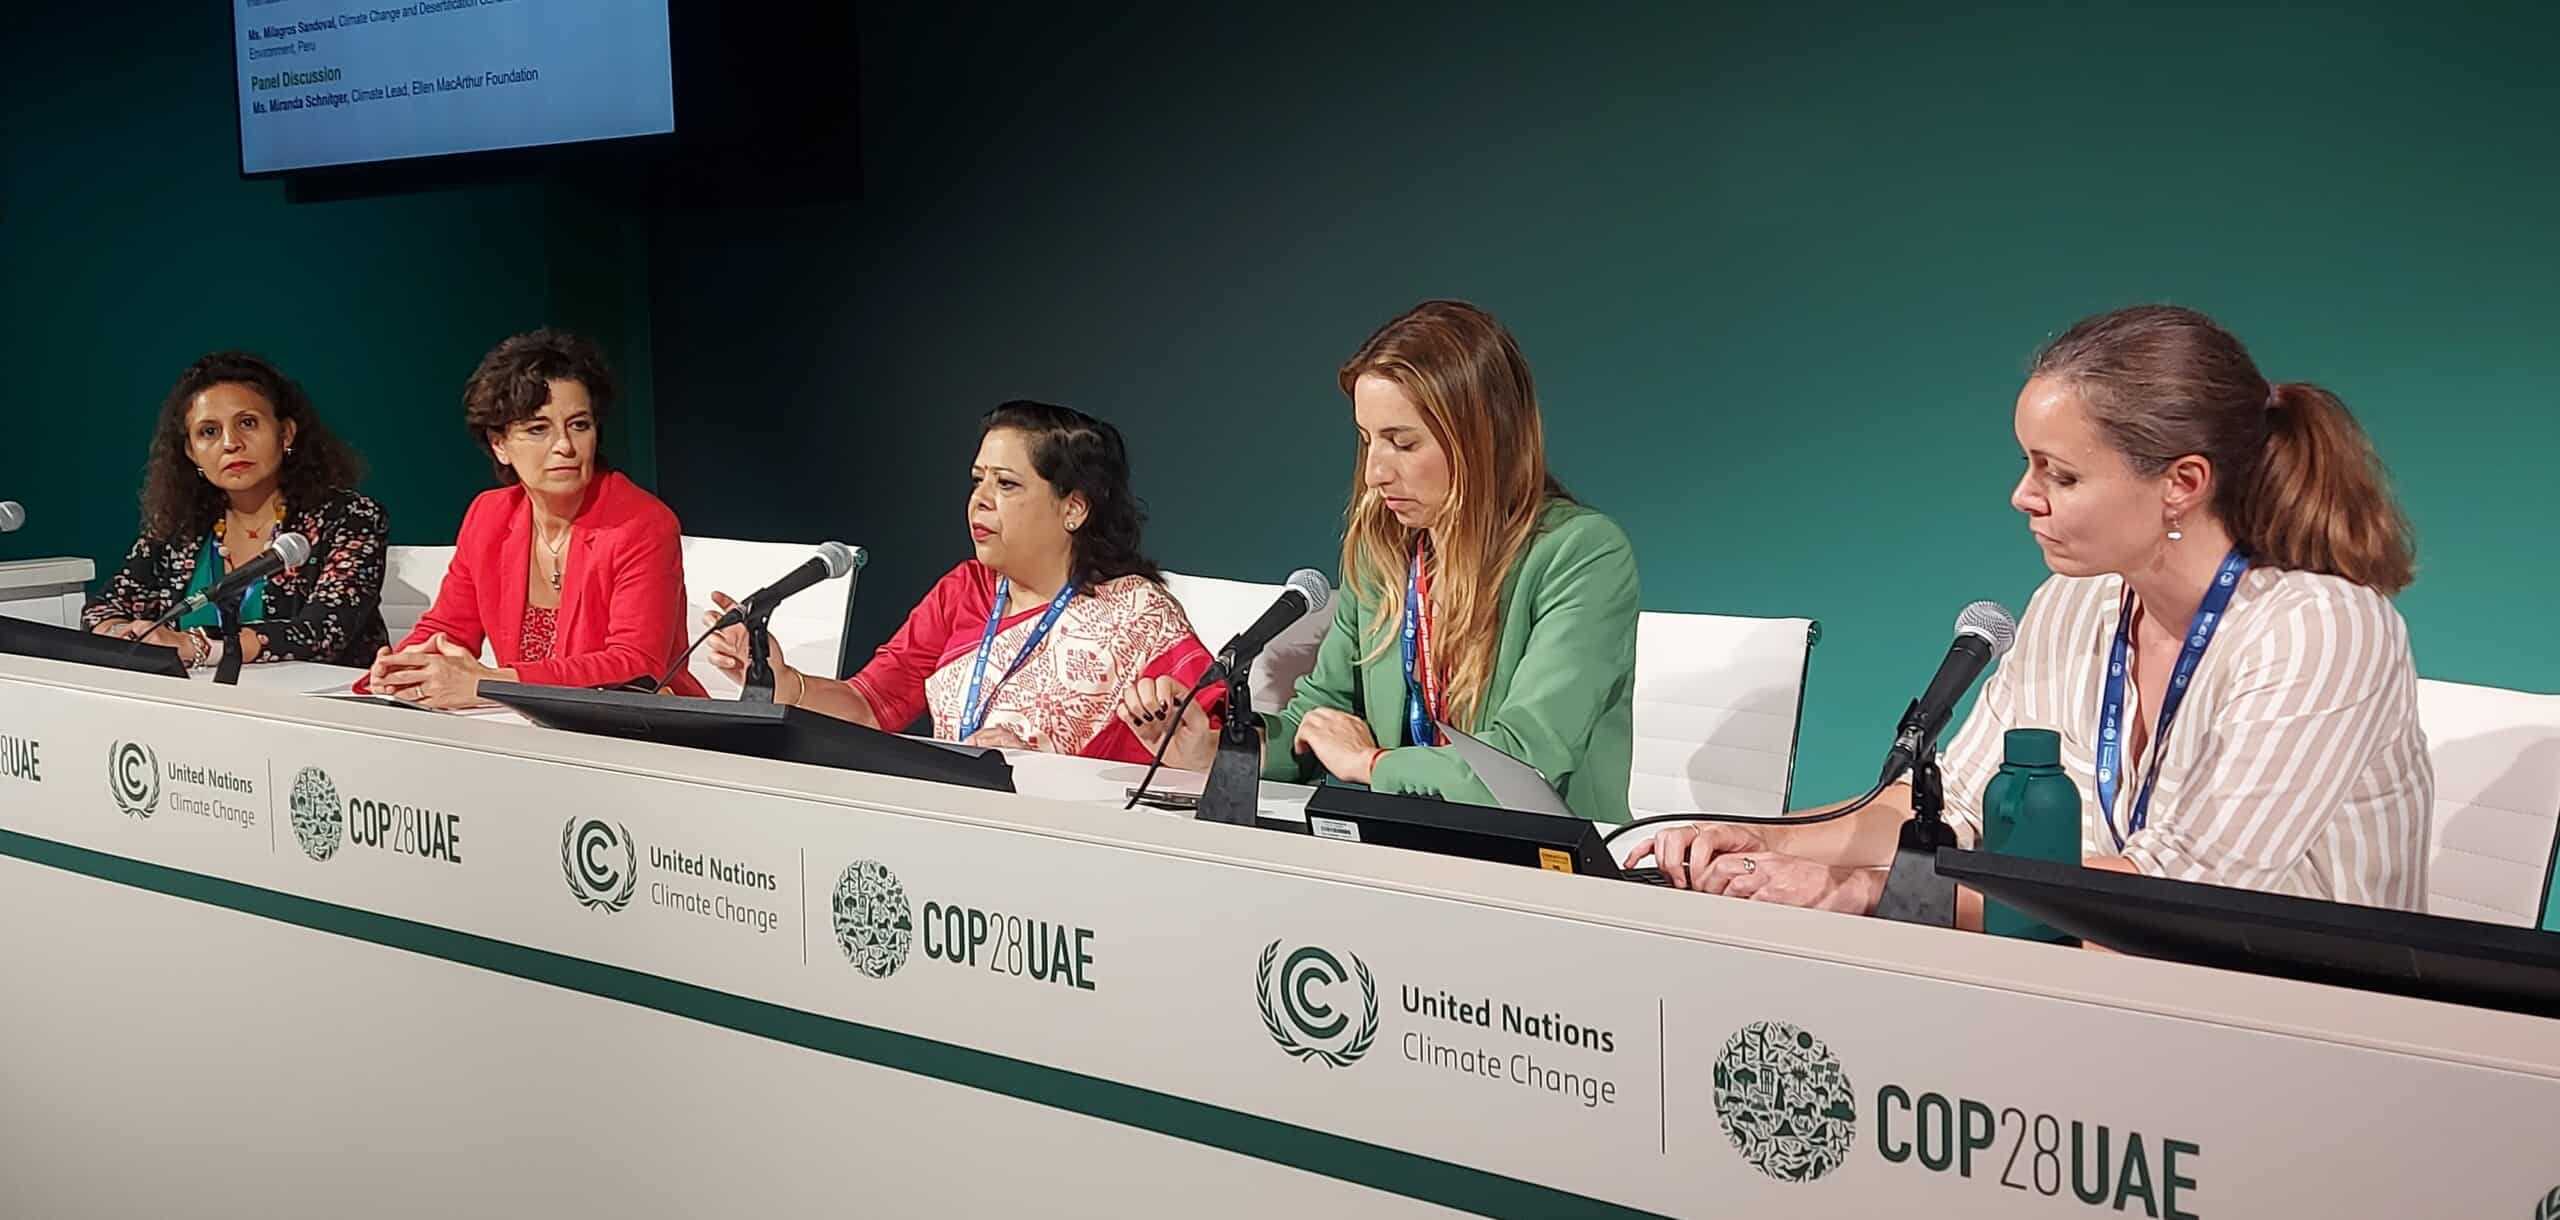 All-female panelists sitting at the podium during COP28 for a discussion on circularity.